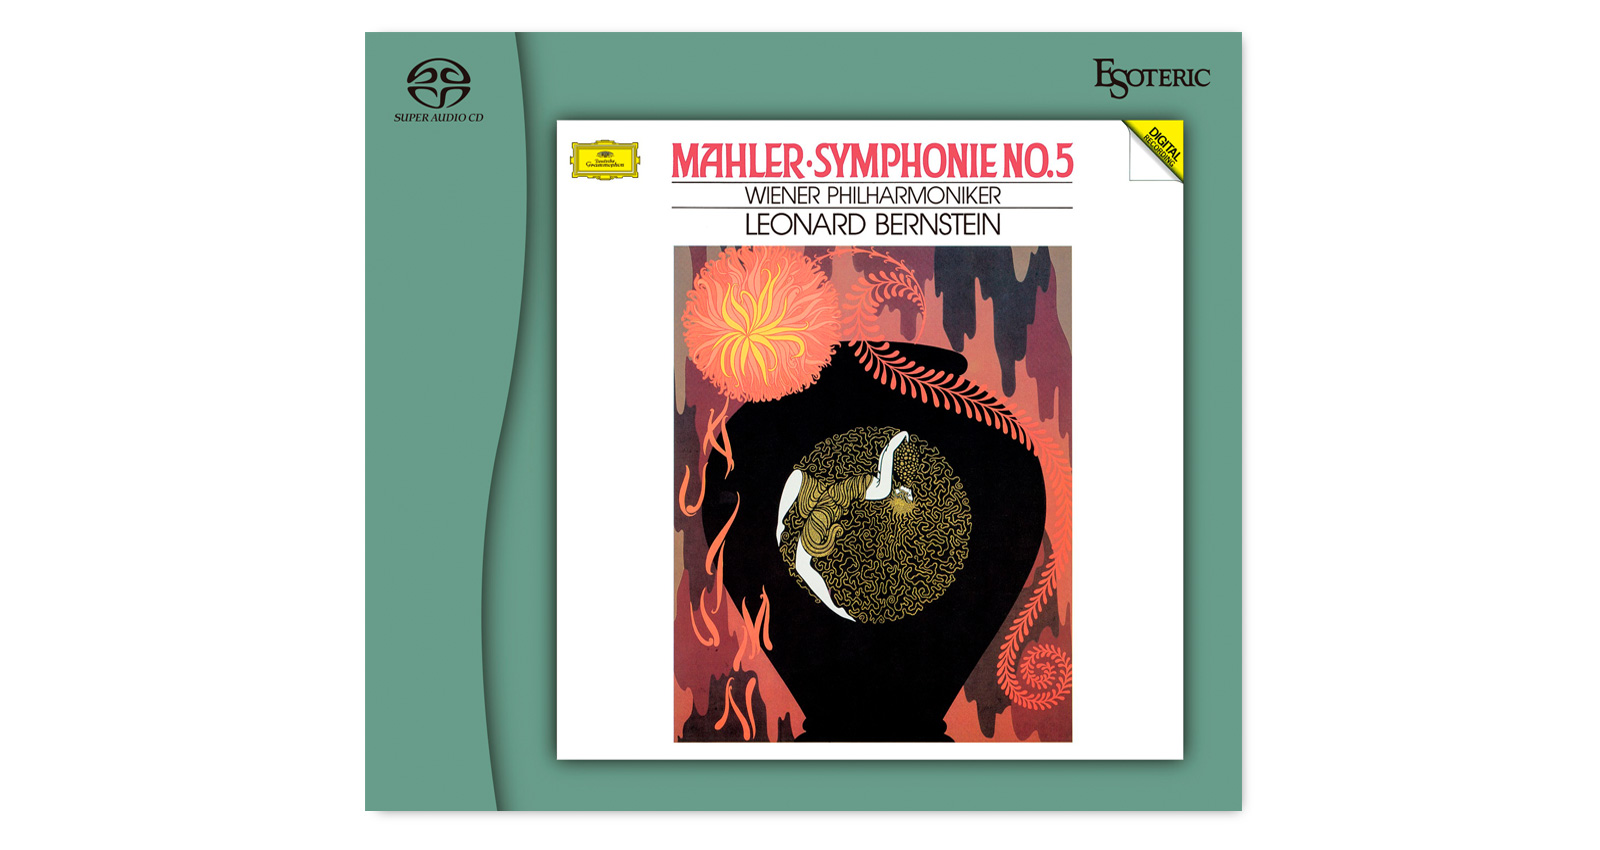 MAHLER Symphony No. 5 | OVERVIEW | ESOTERIC:Japan high-end audio